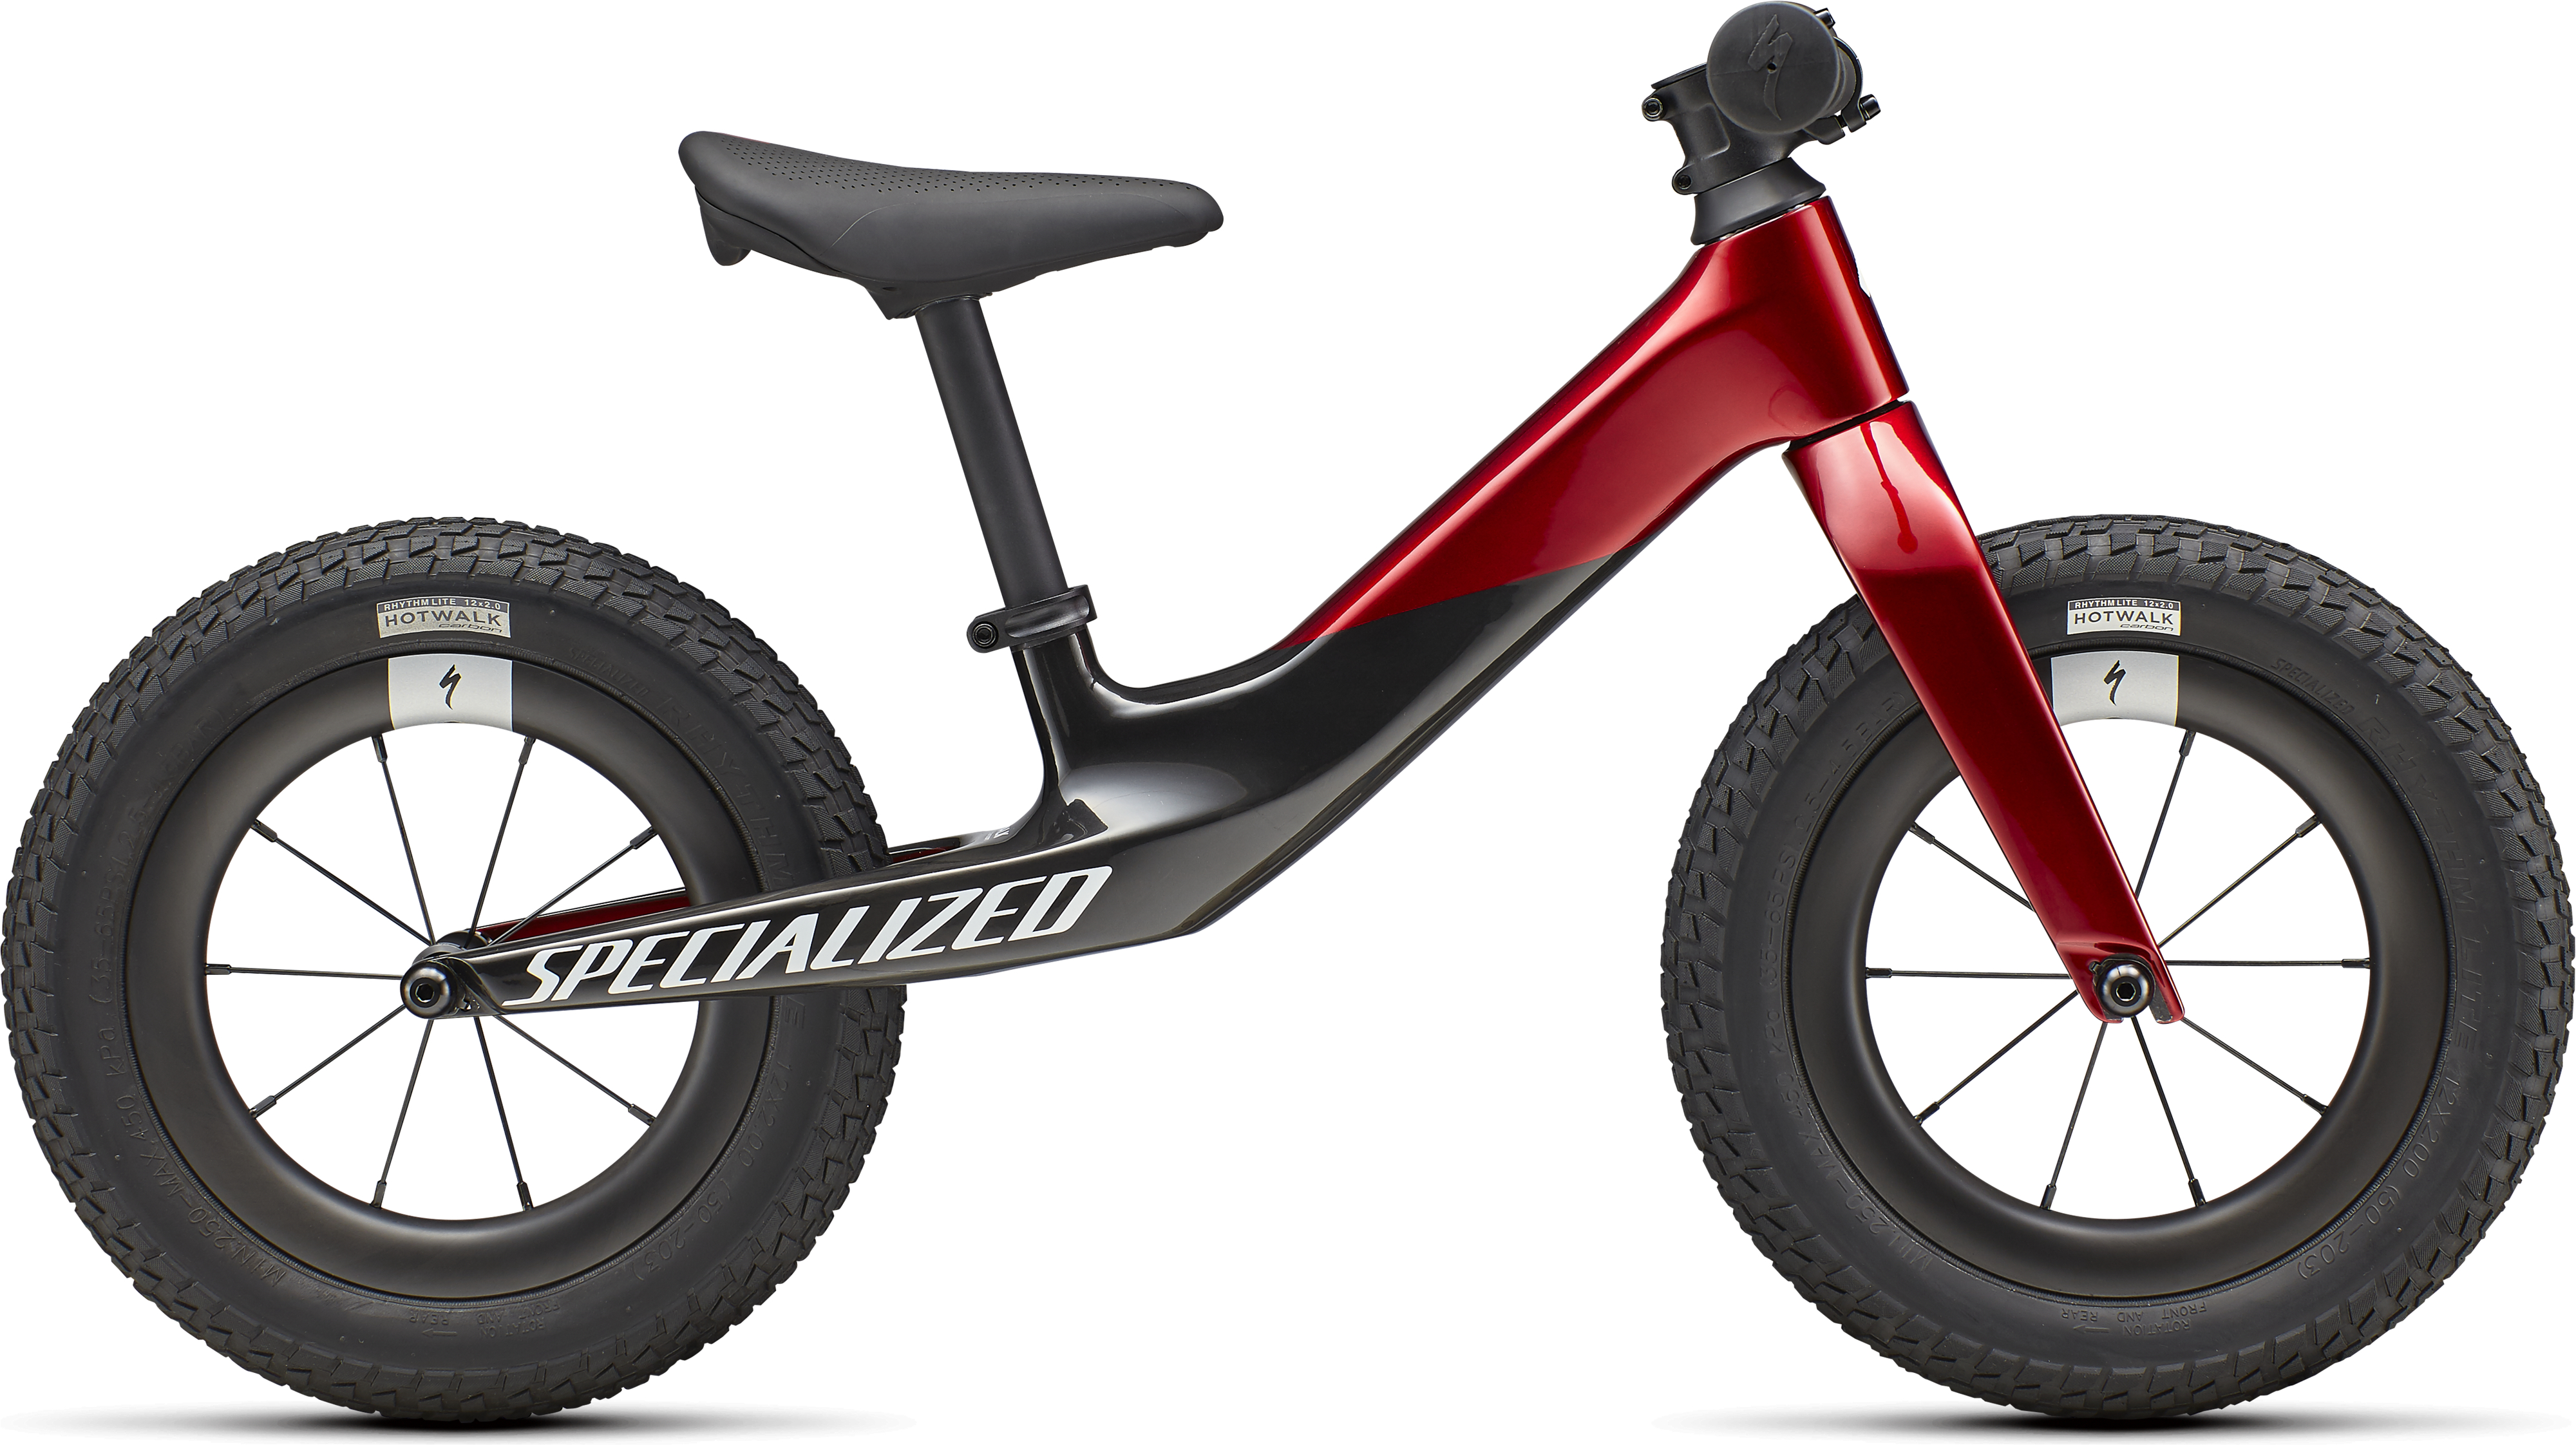 Specialized  Hotwalk Carbon Balance Bike 12 GLOSS RED TINT OVER FLAKE SILVER BASE / CARBON / WHITE W/ GOLD PEARL